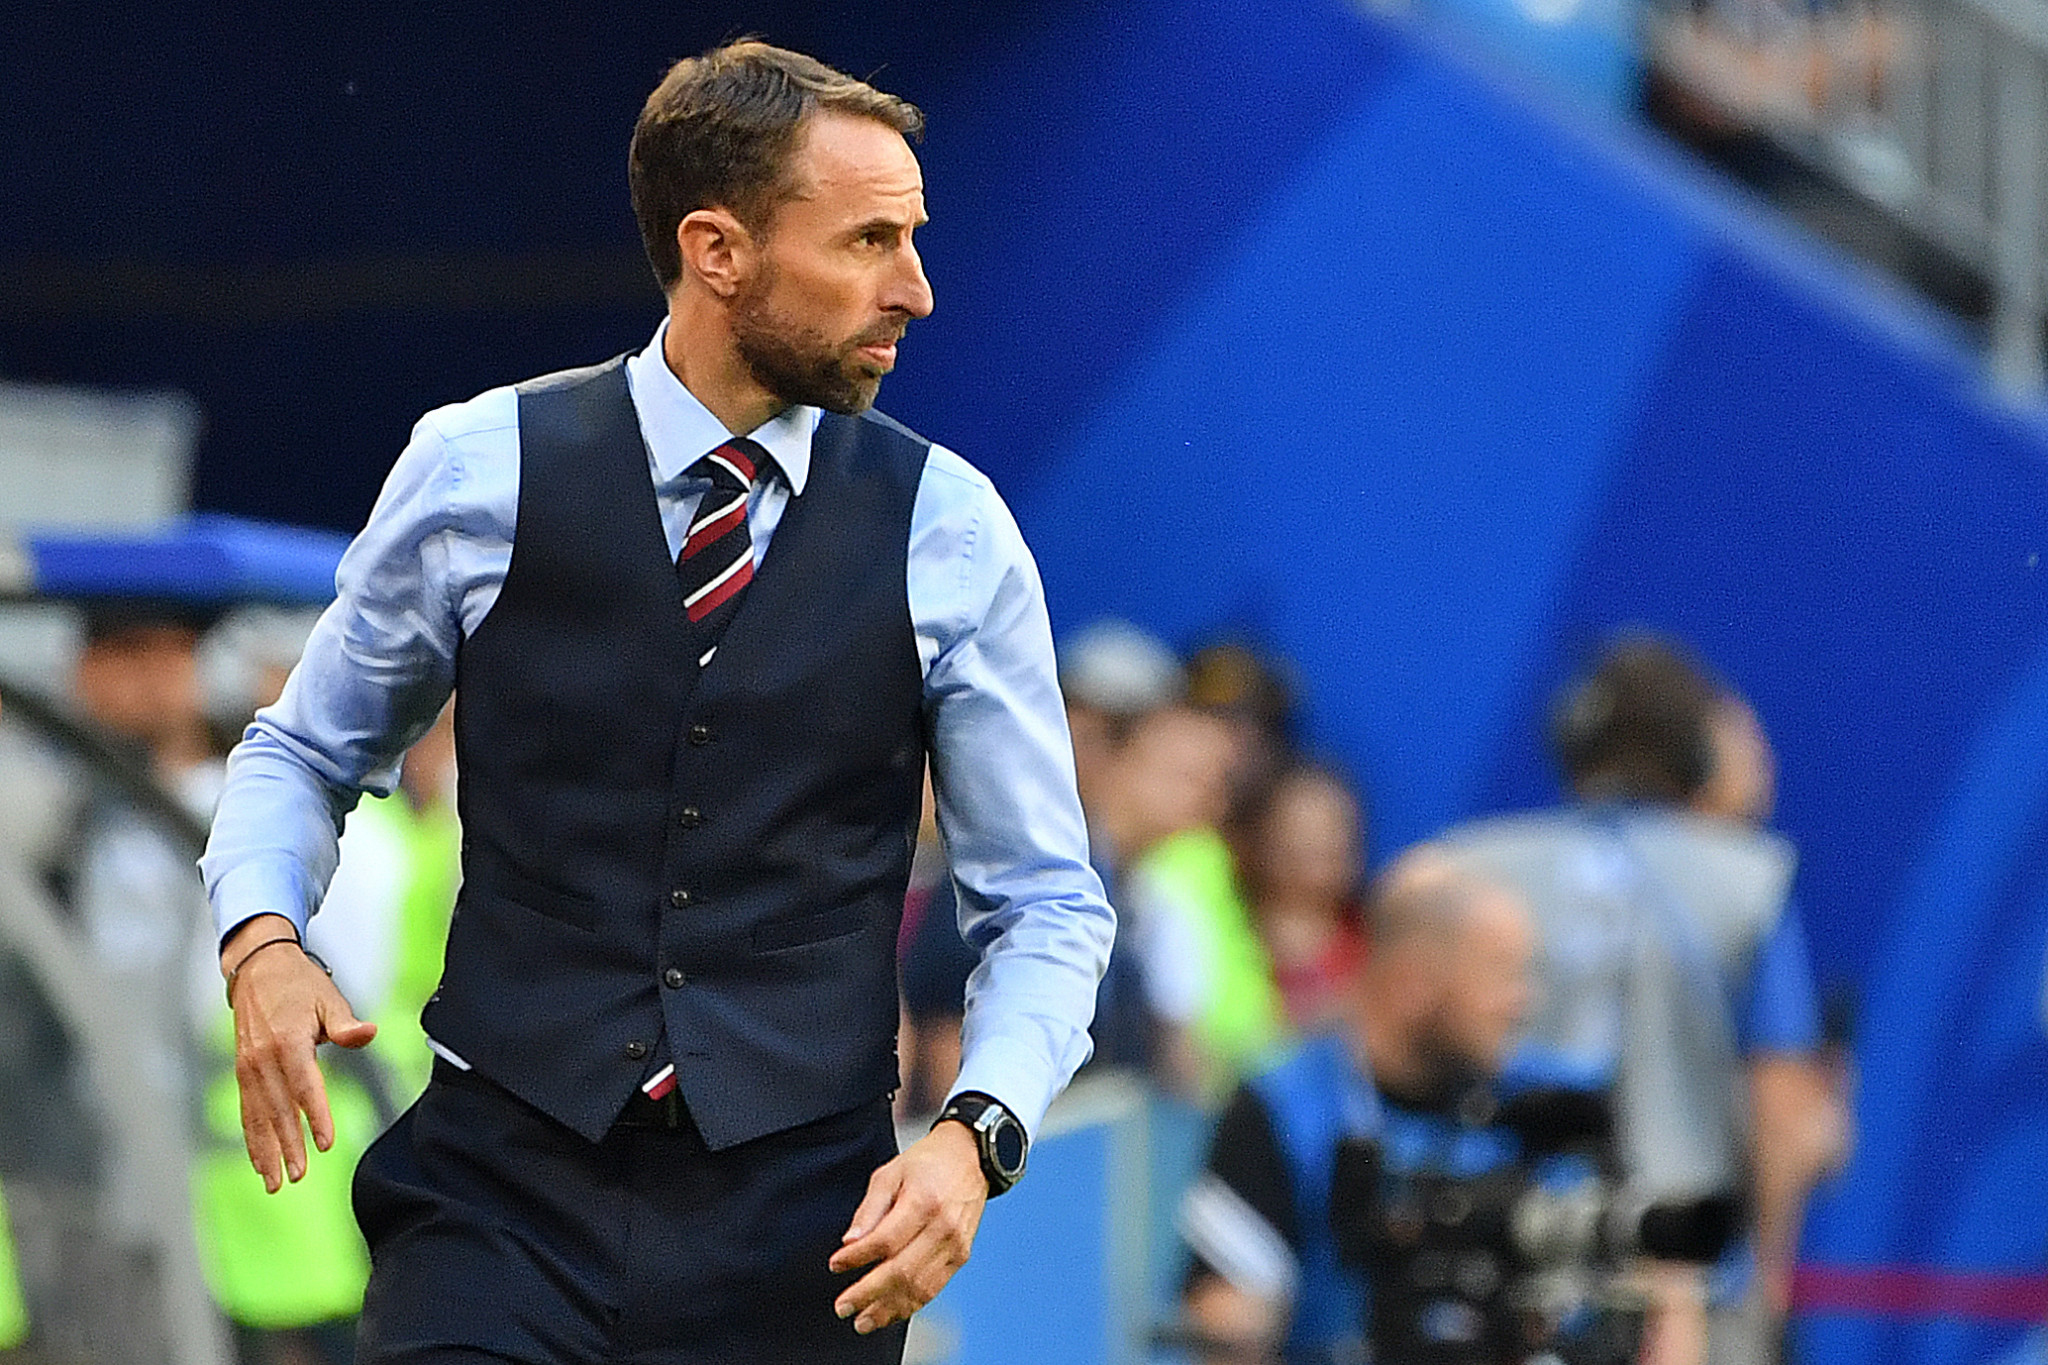 England manager Gareth Southgate, sporting his distinctive waistcoat, looks on during the quarter-final ©Getty Images